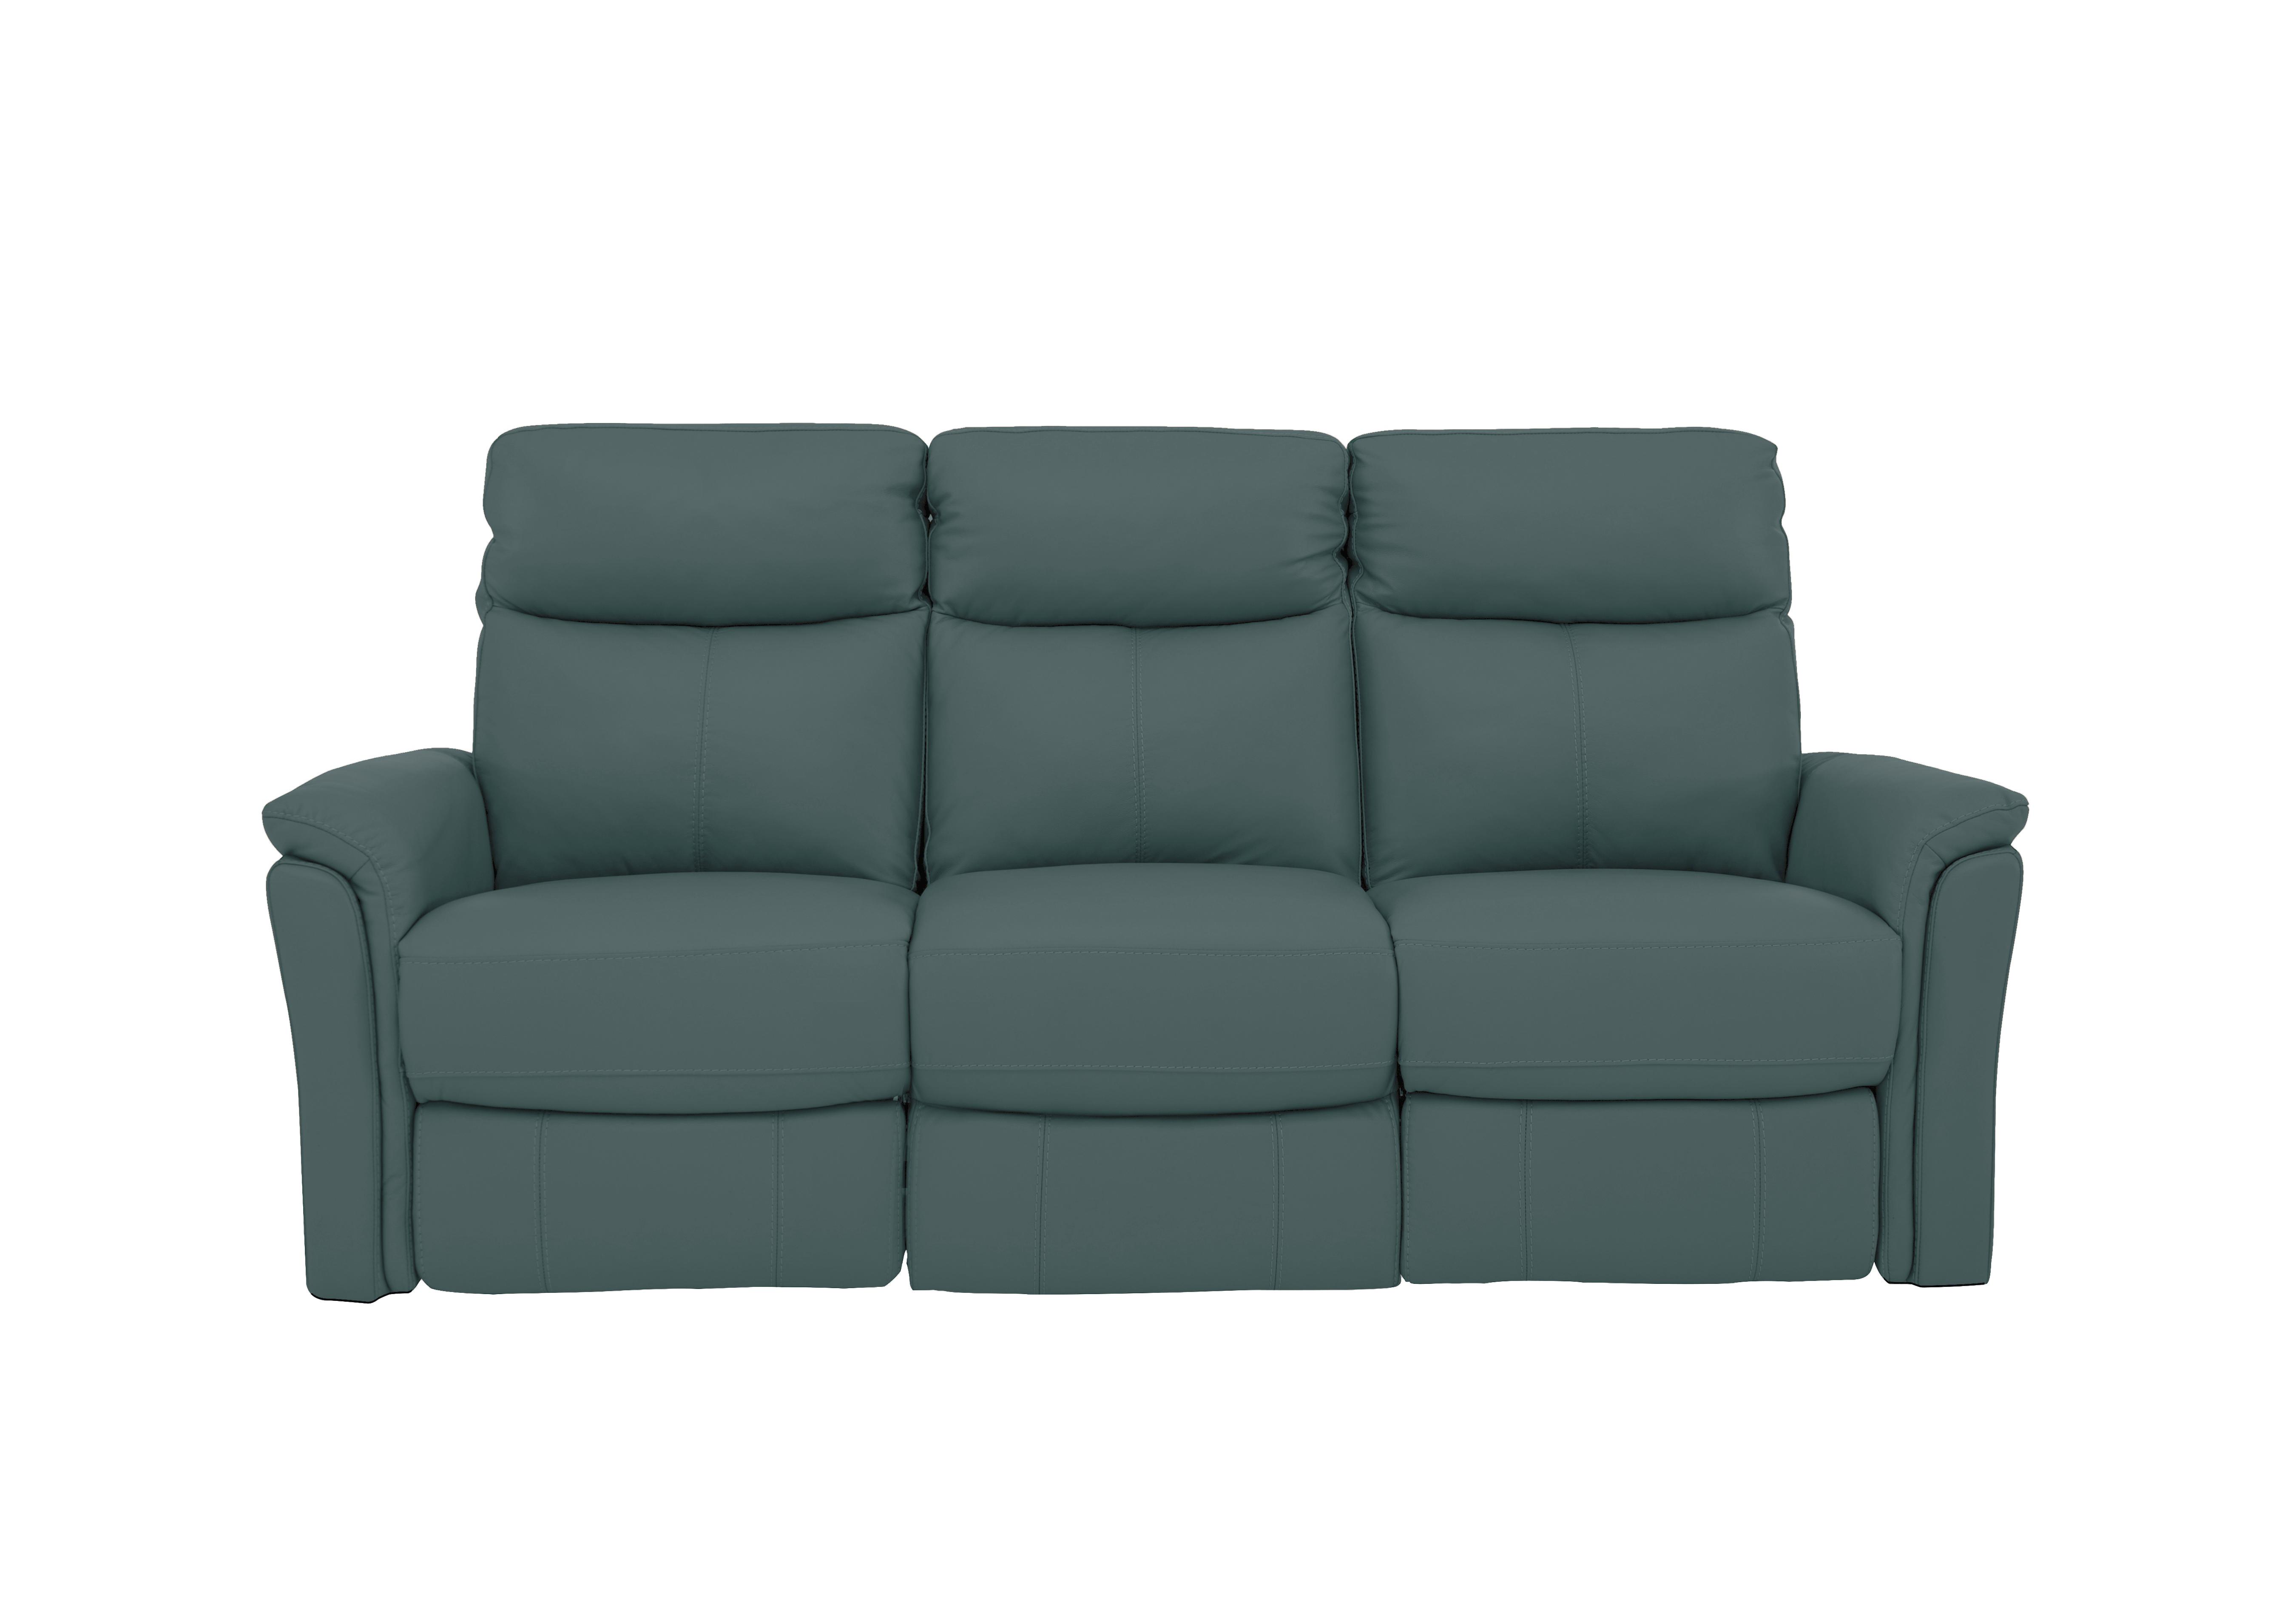 Compact Collection Piccolo 3 Seater Sofa in Bv-301e Lake Green on Furniture Village